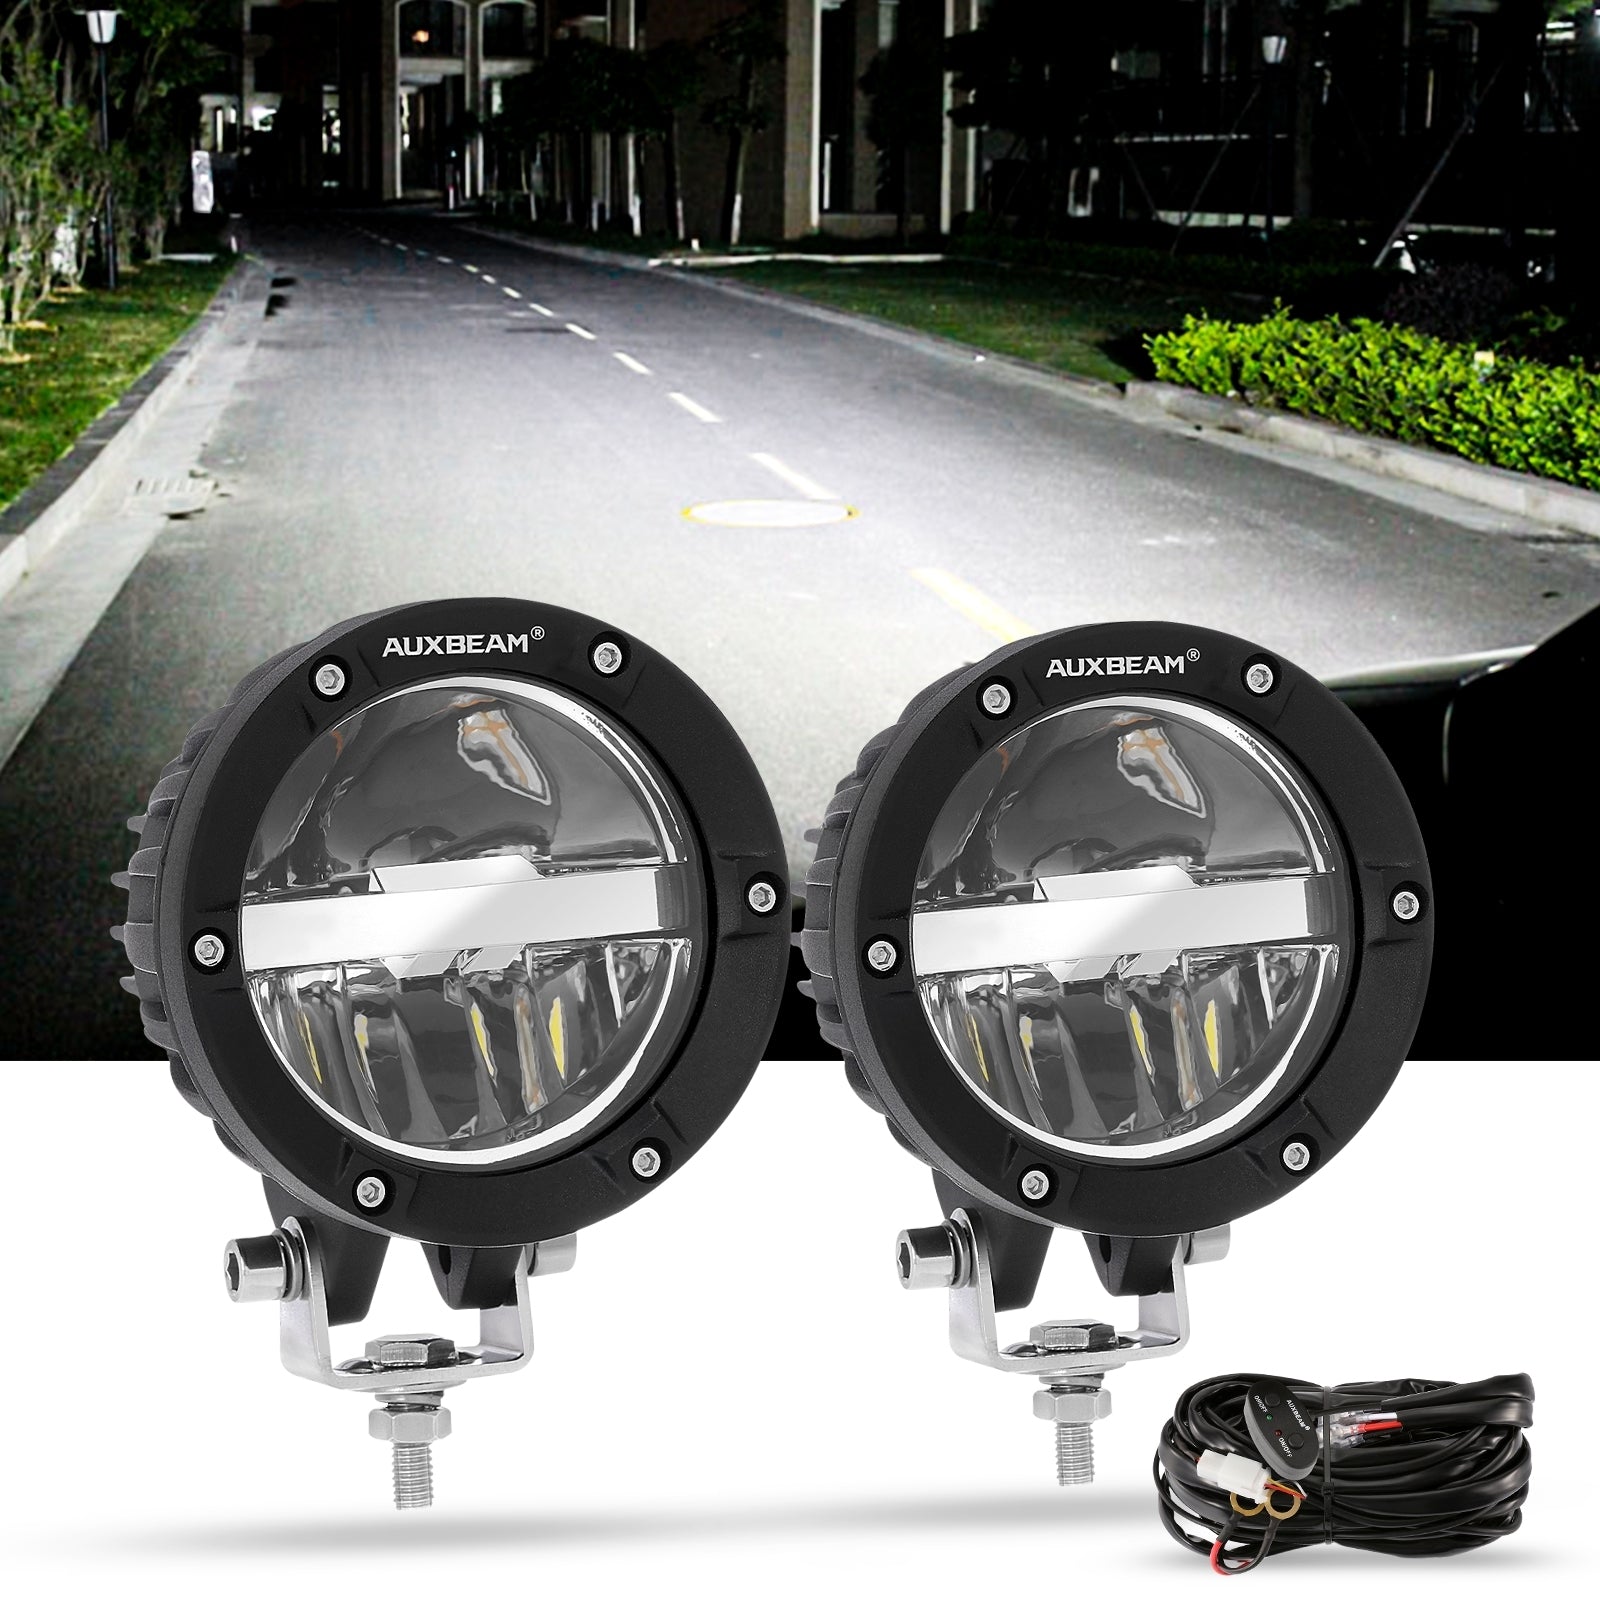 (2pcs/set) 4 Inch 100W Round Offroad LED Driving Lights Combo Beam w/ Wiring Harness